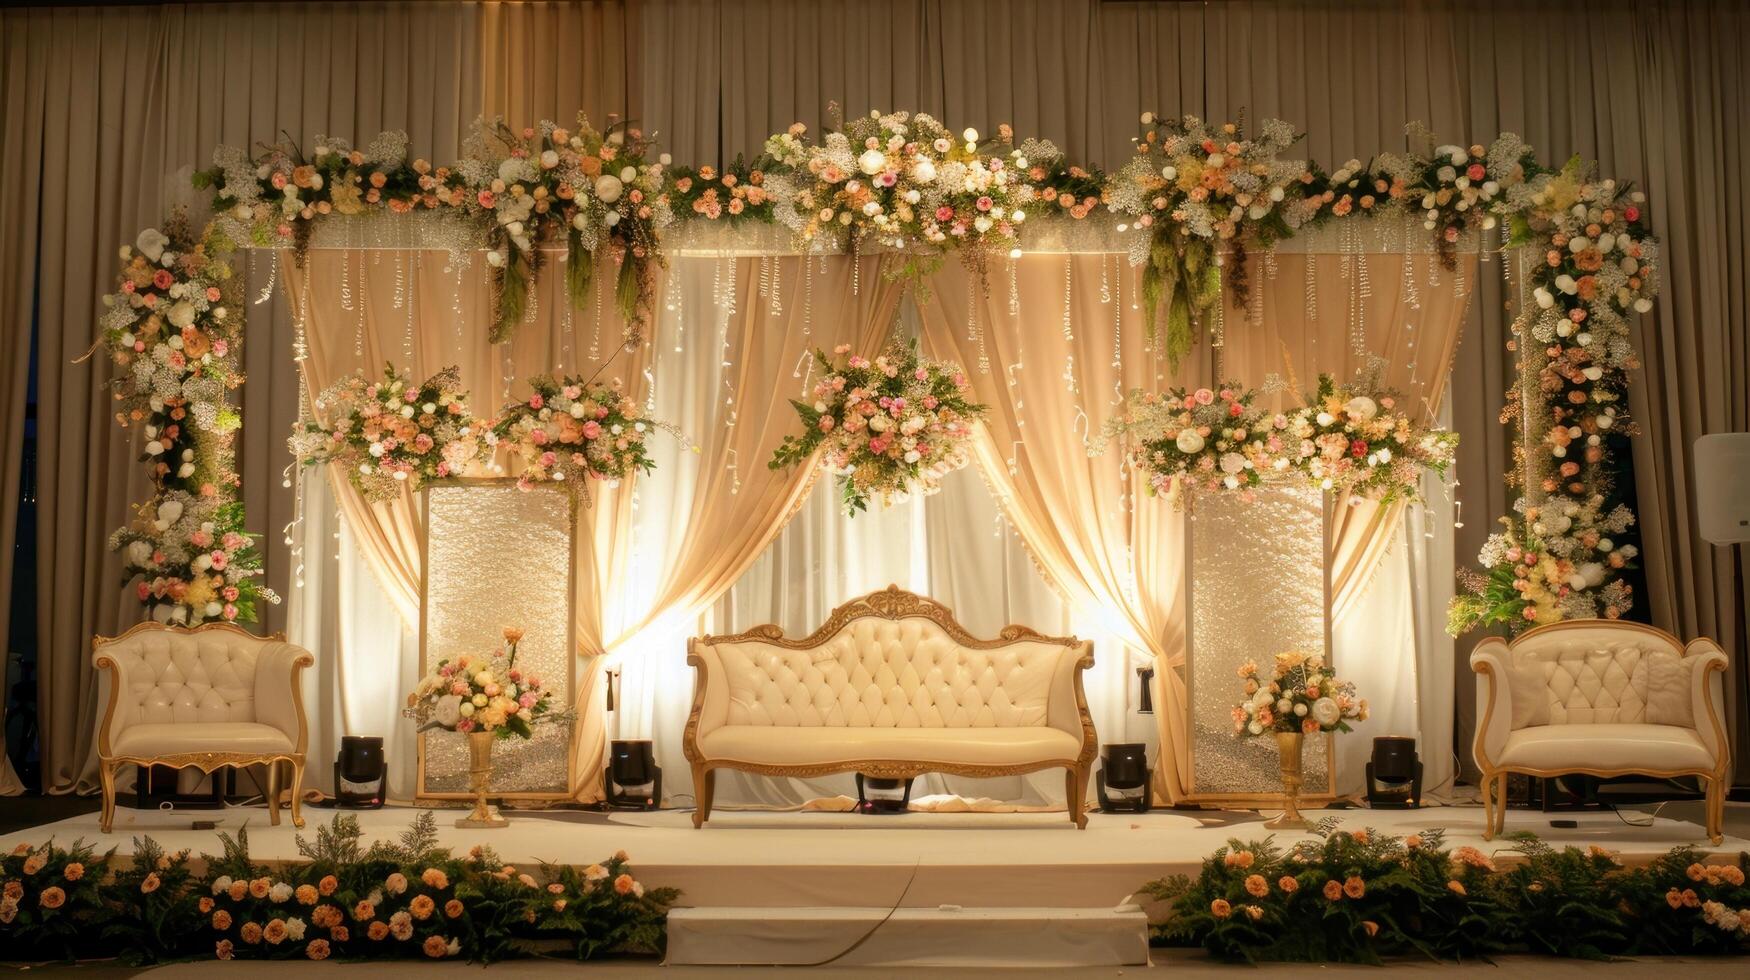 Wedding stage decoration background inside the building with elegant and beautiful flower decorations photo